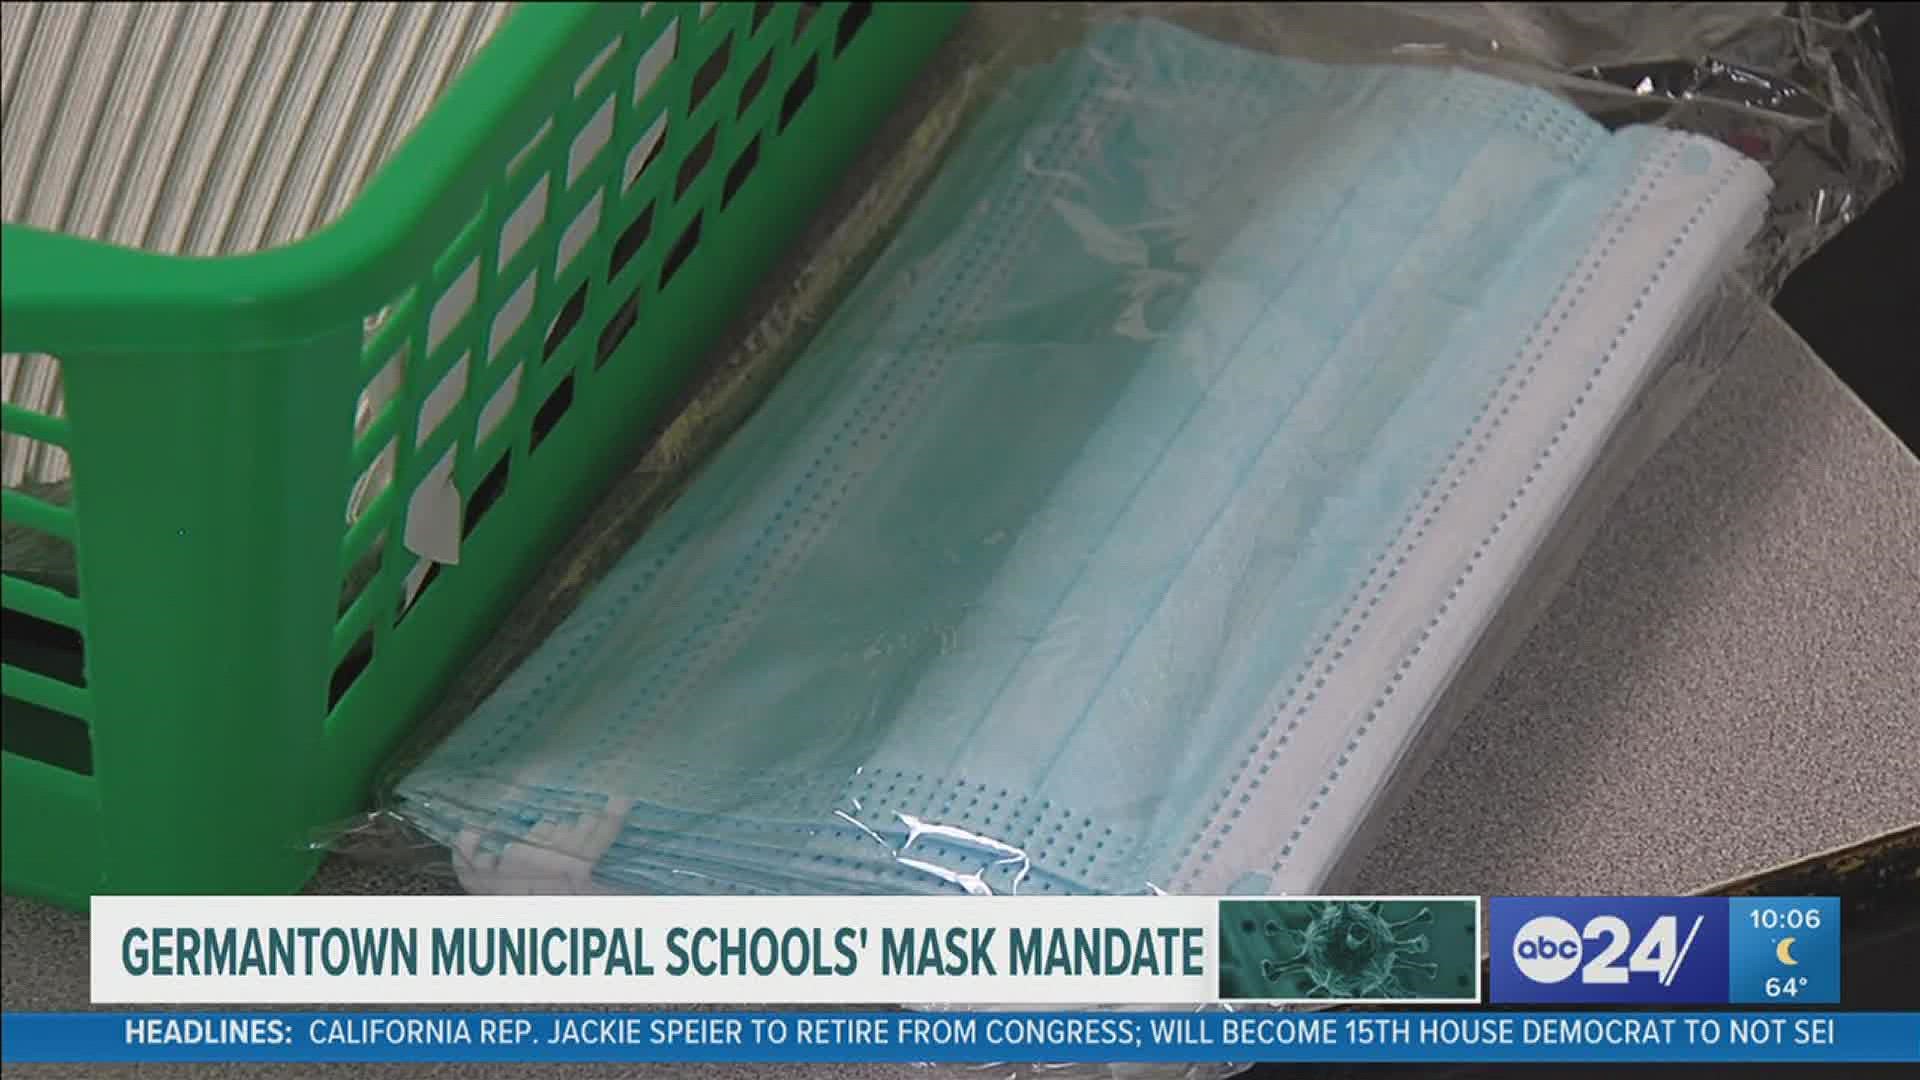 SCHD said it's investigating & documenting complaints it receives about Health Order violations. Germantown is the only suburban district with mask mandate Tuesday.